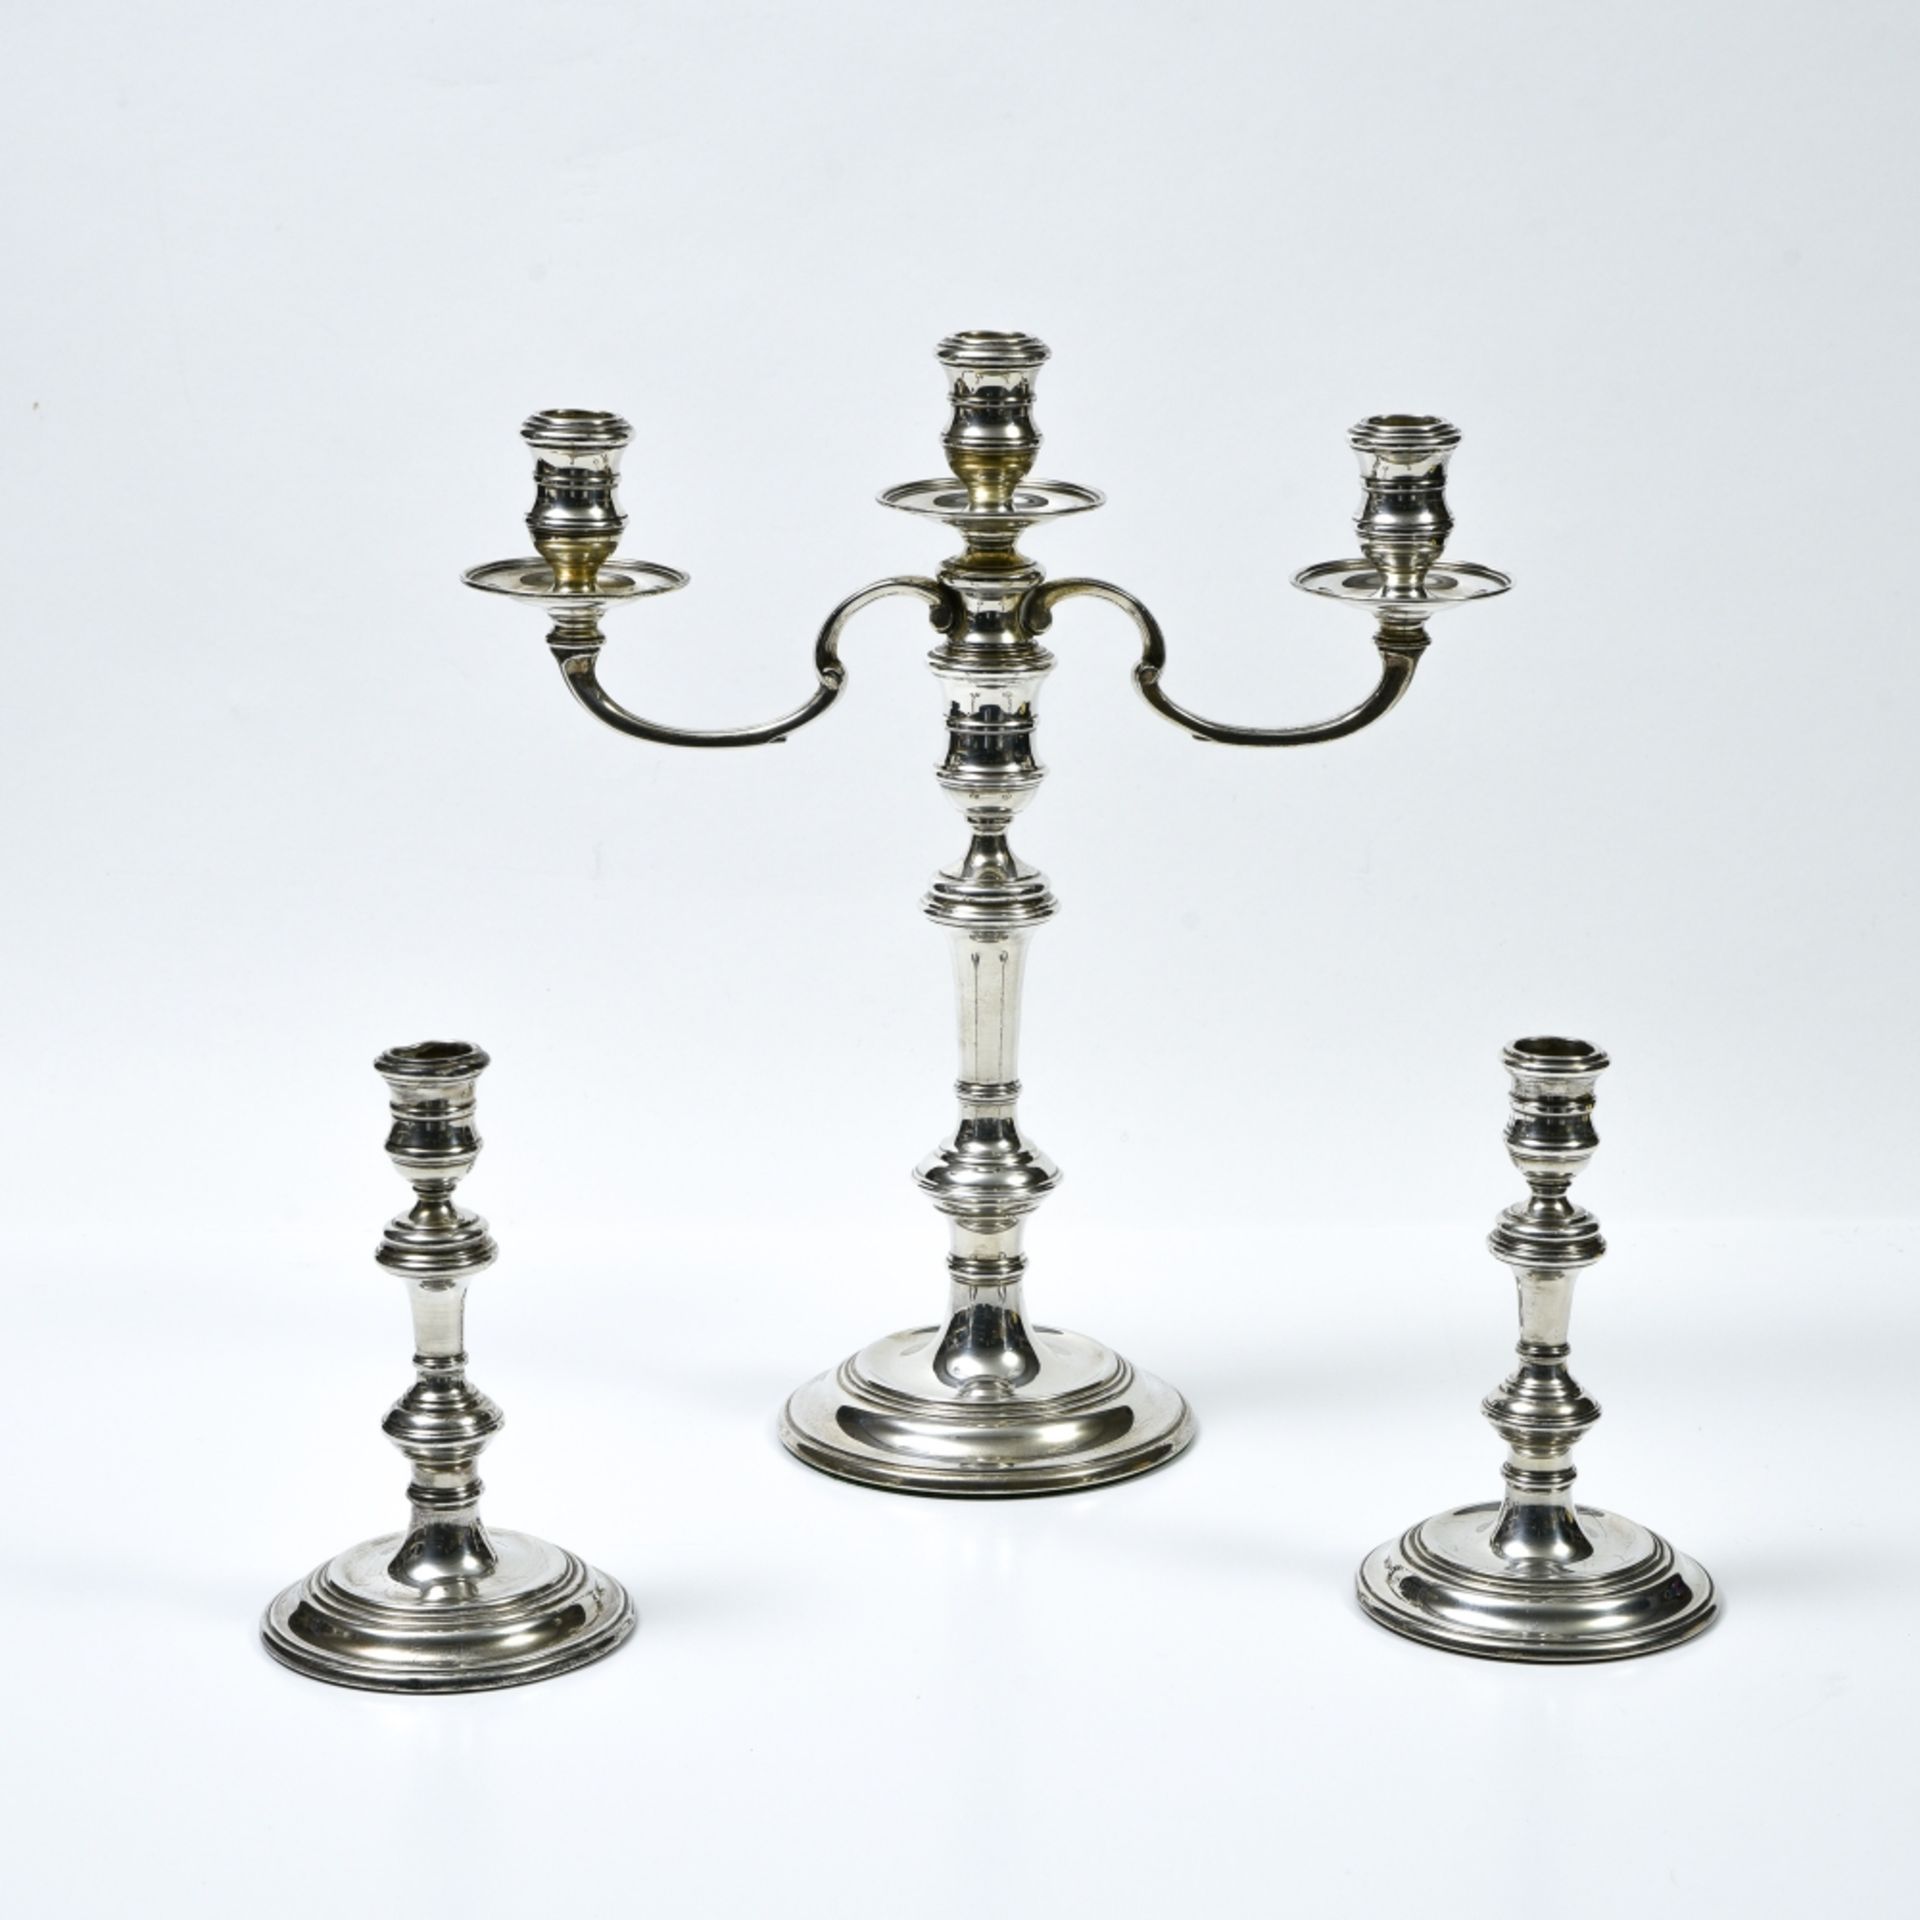 A chandelier and two candlesticks RICHARD COMYNS English silver, silversmiths' hallmarks on each